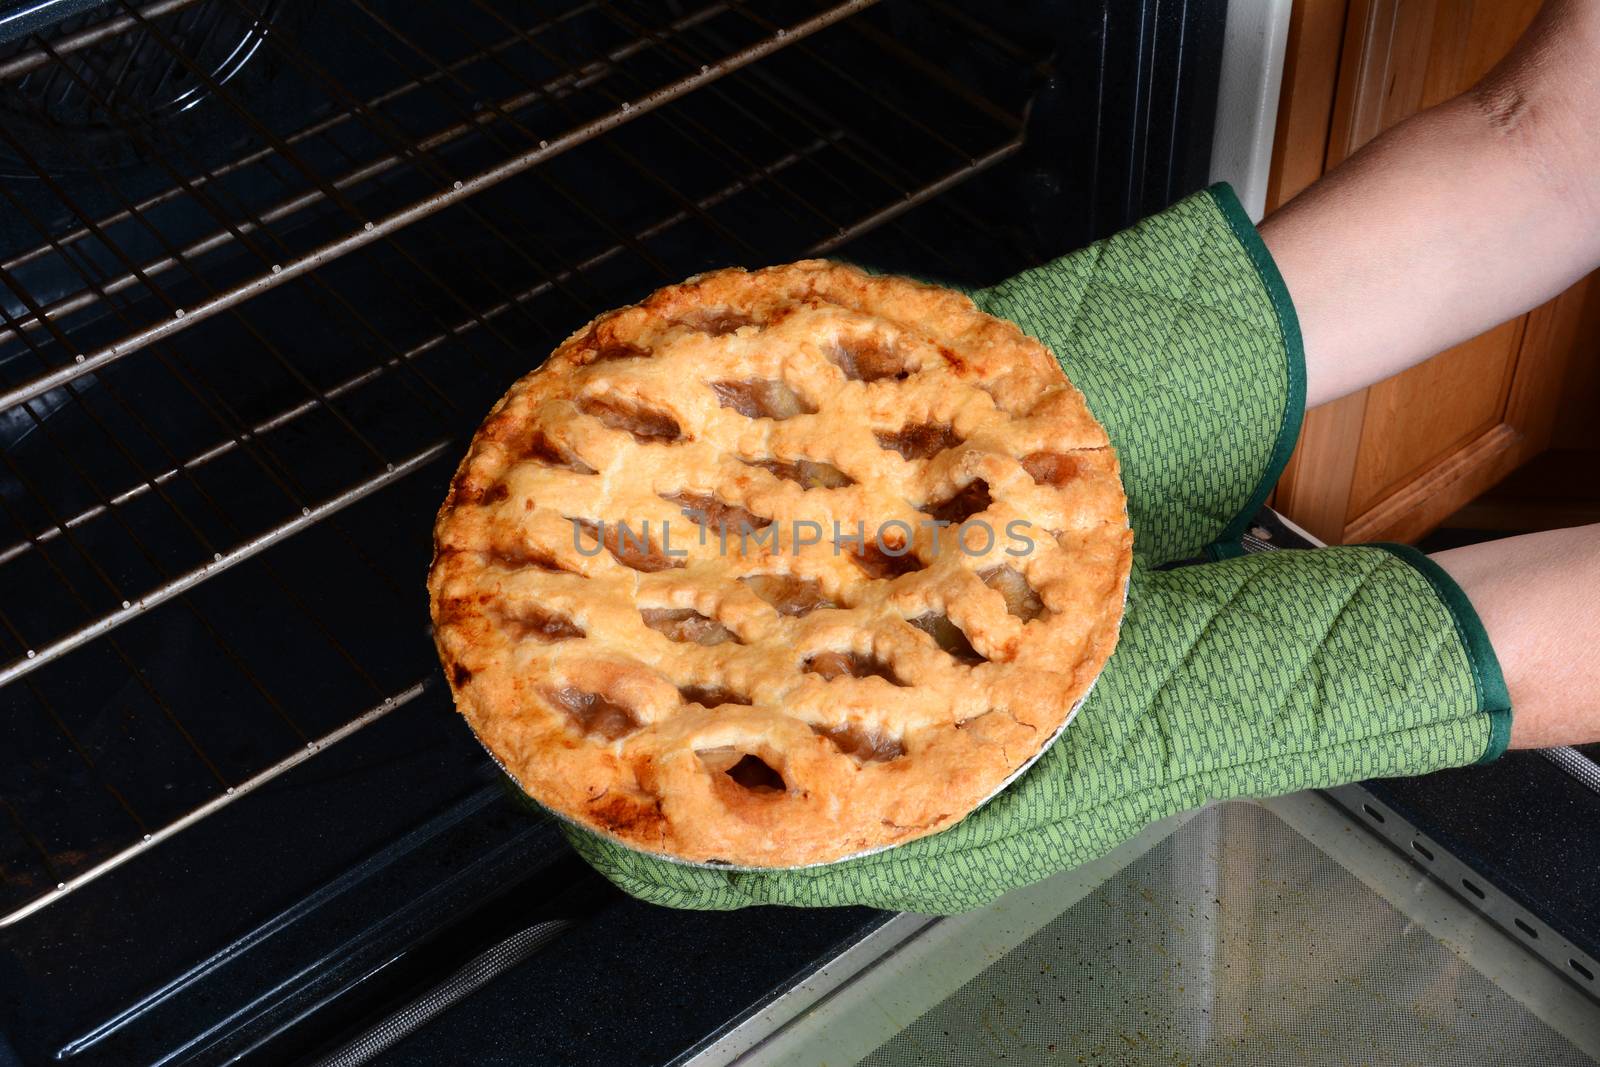 Taking Apple Pie From Oven by sCukrov